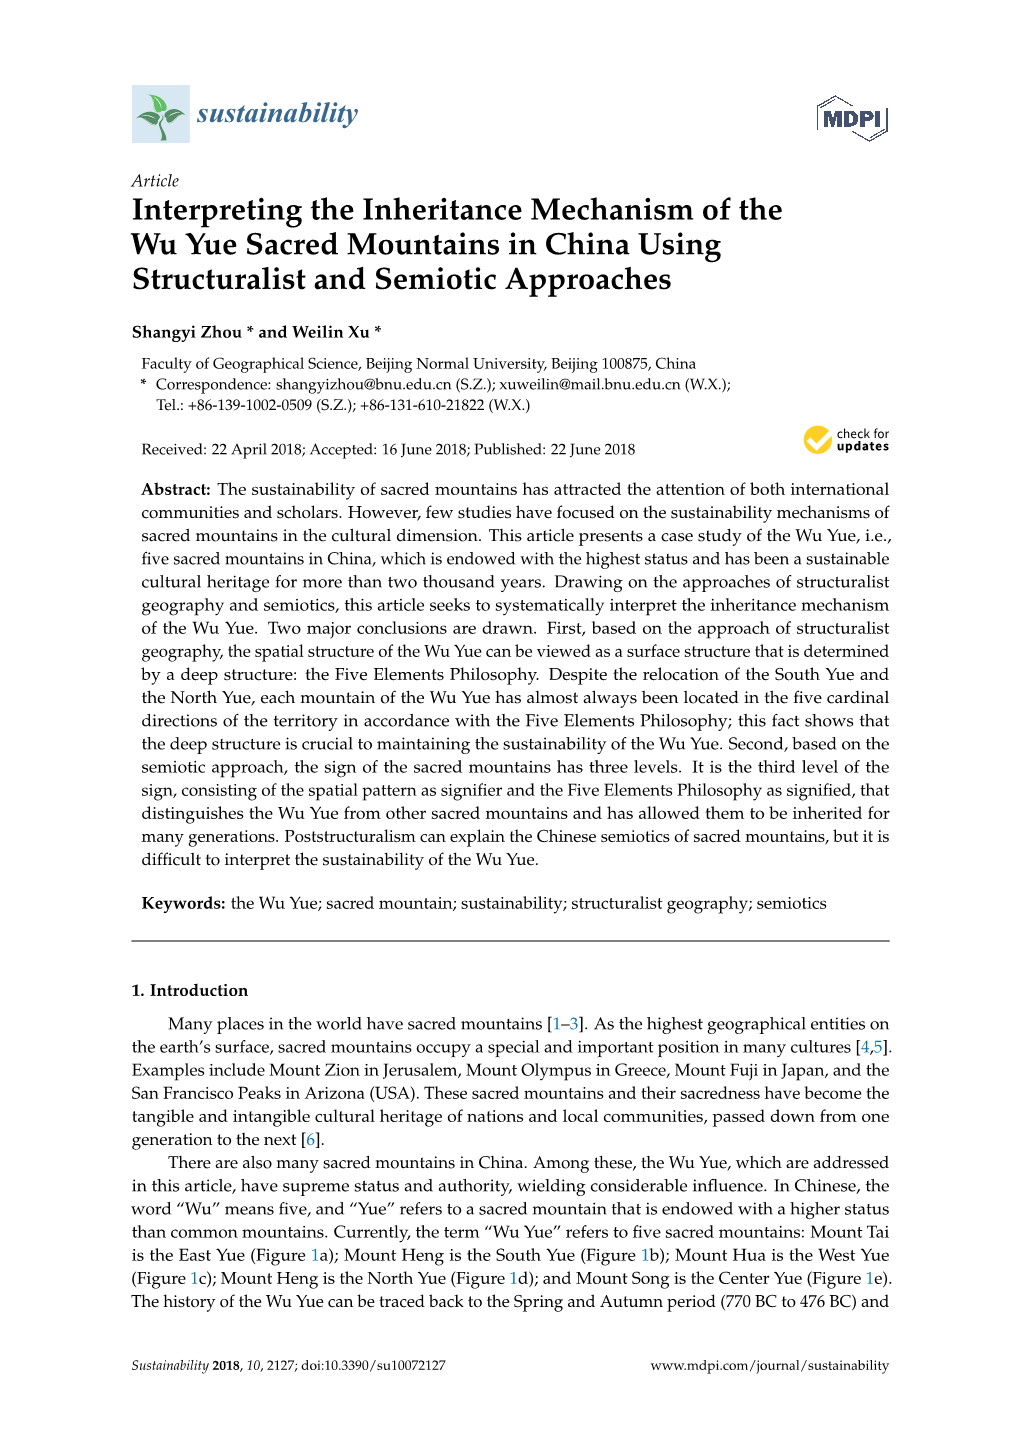 Interpreting the Inheritance Mechanism of the Wu Yue Sacred Mountains in China Using Structuralist and Semiotic Approaches